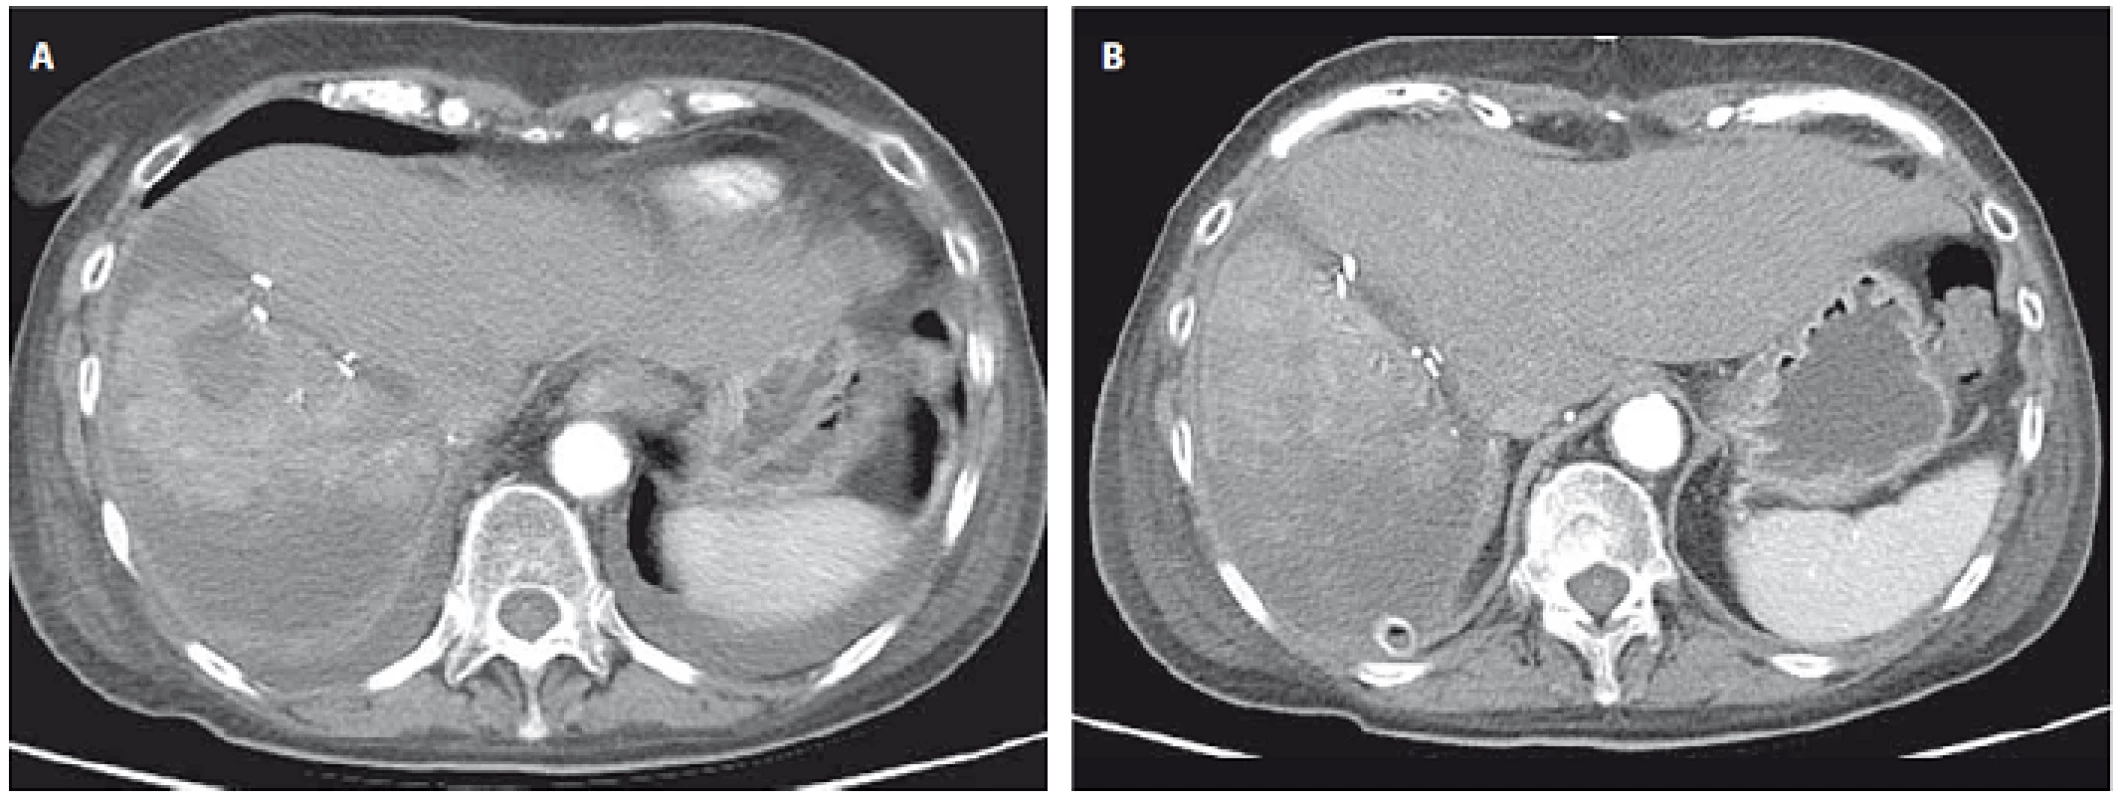 CT image showing the liver four days after ALPPS where further right lobe atrophy and necrosis is seen with no significant contralateral hypertrophy (A) after 14 days where signifi cant left lobe hypertrophy is noticed (B).